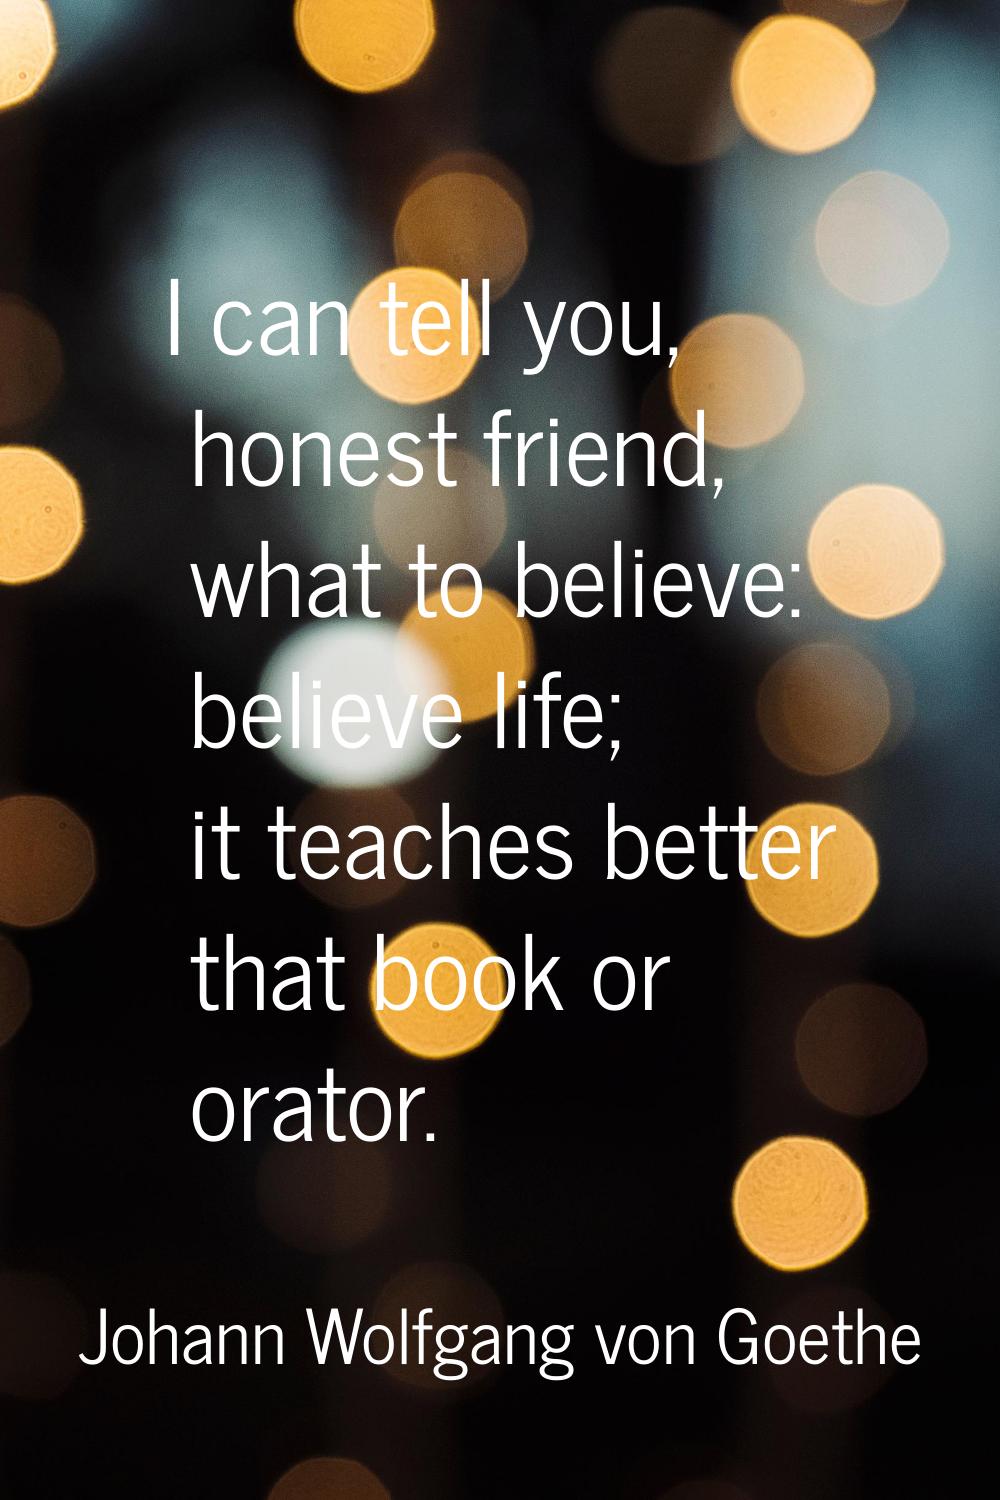 I can tell you, honest friend, what to believe: believe life; it teaches better that book or orator